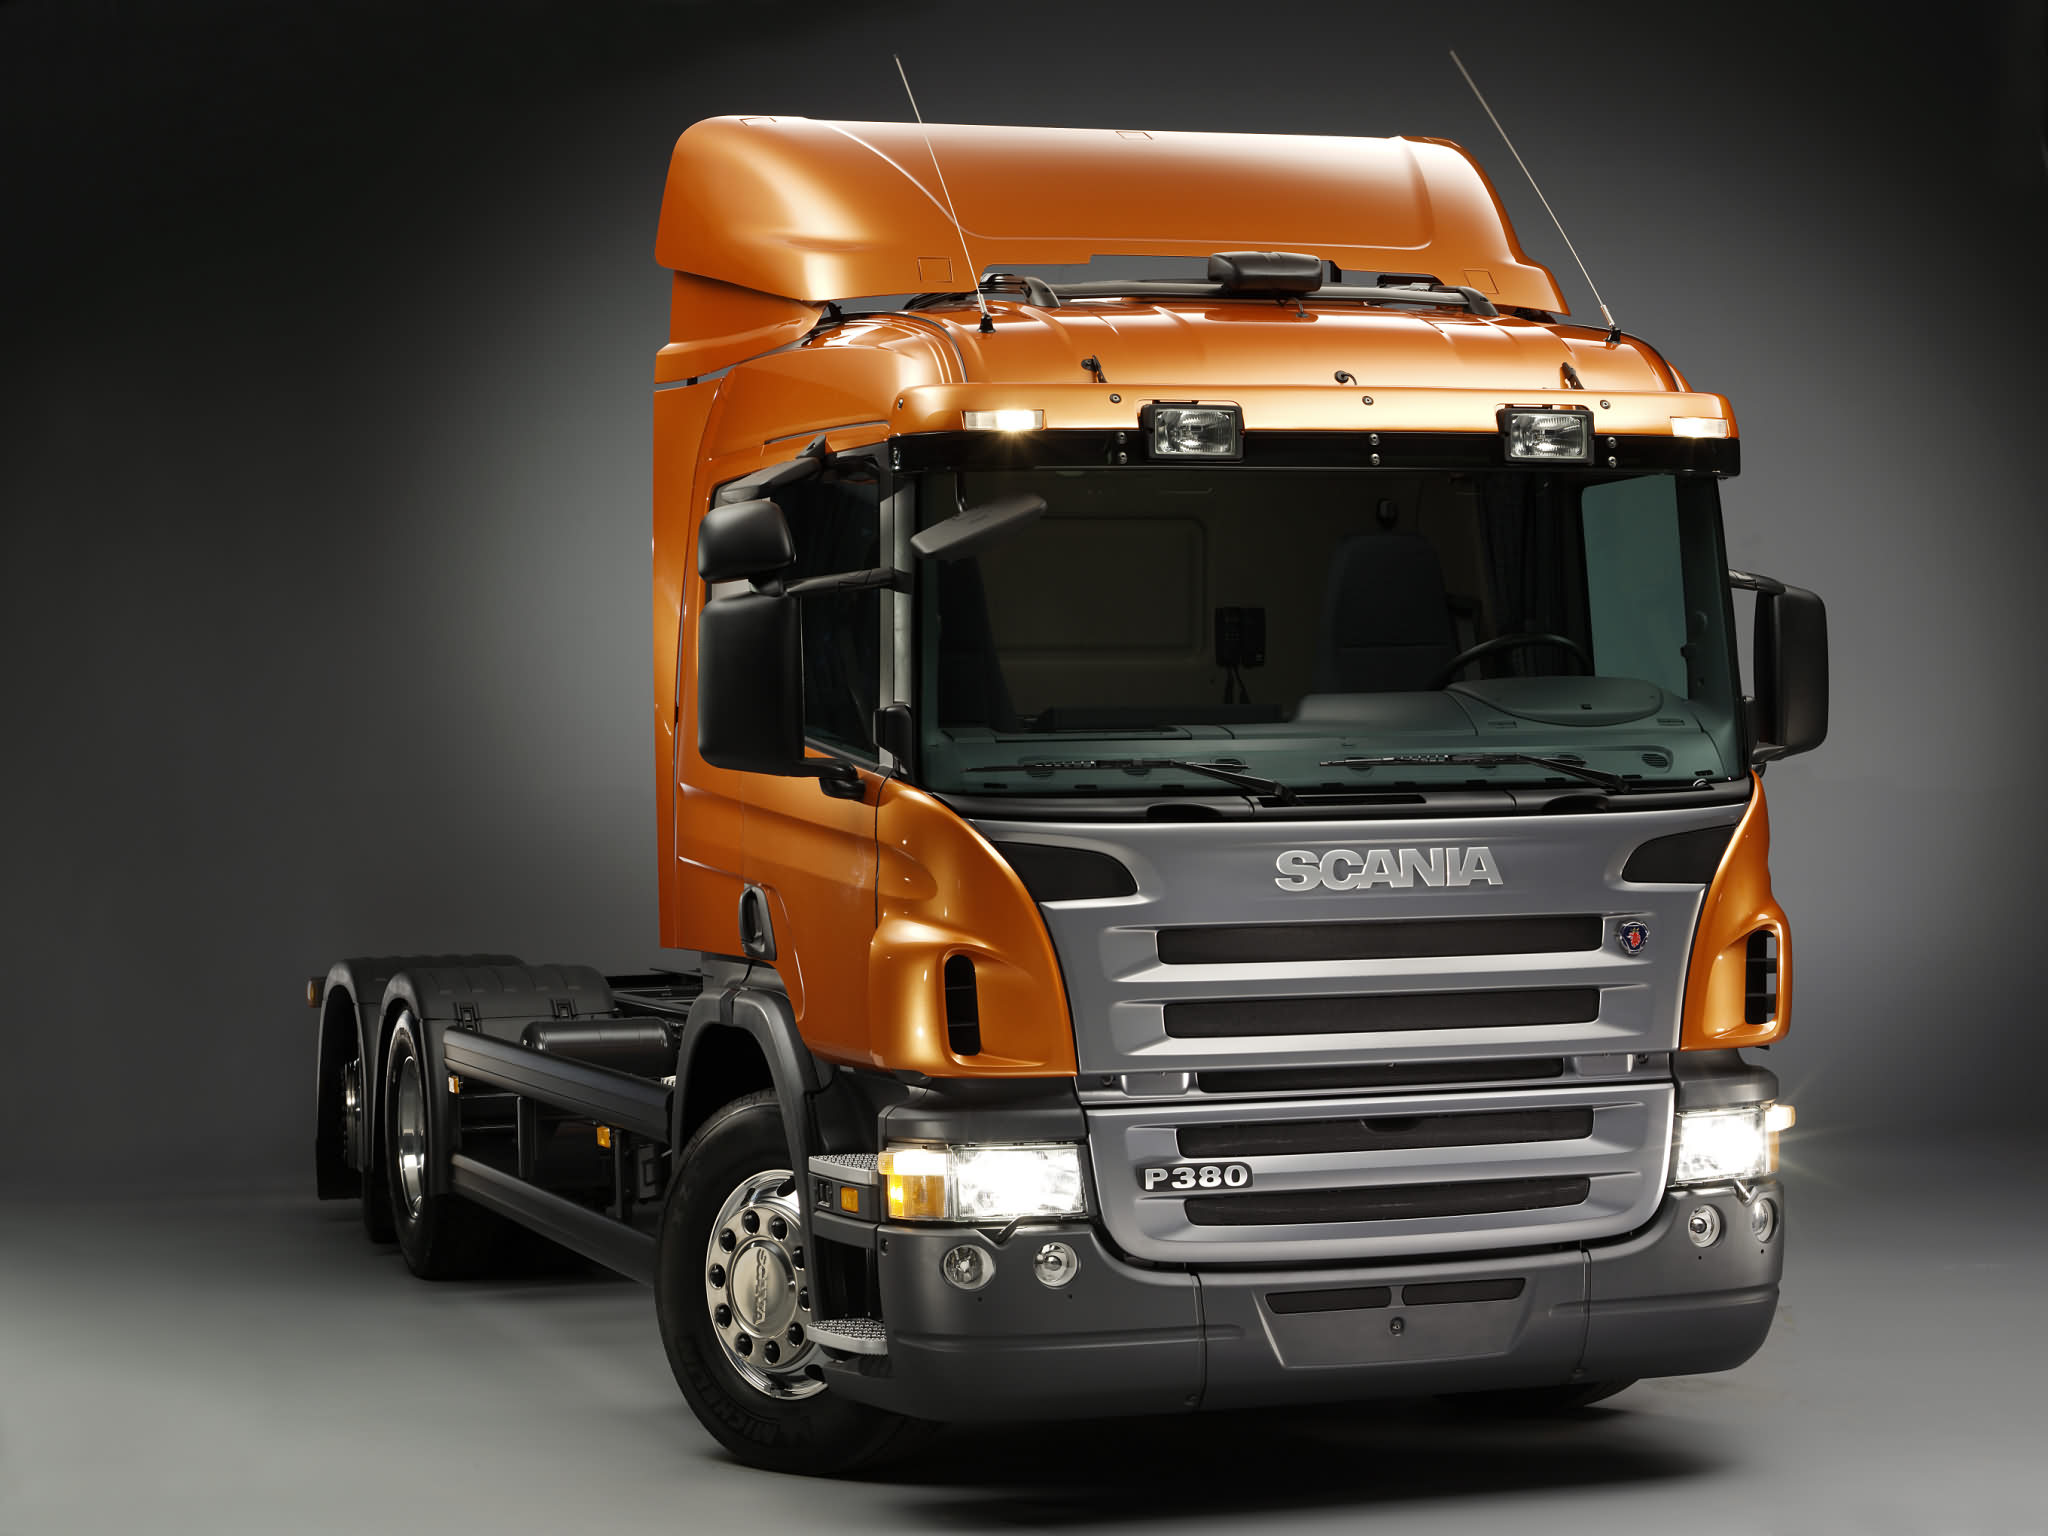 High Quality Tuning Files Scania P-Serie PDE Euro4 310 310hp